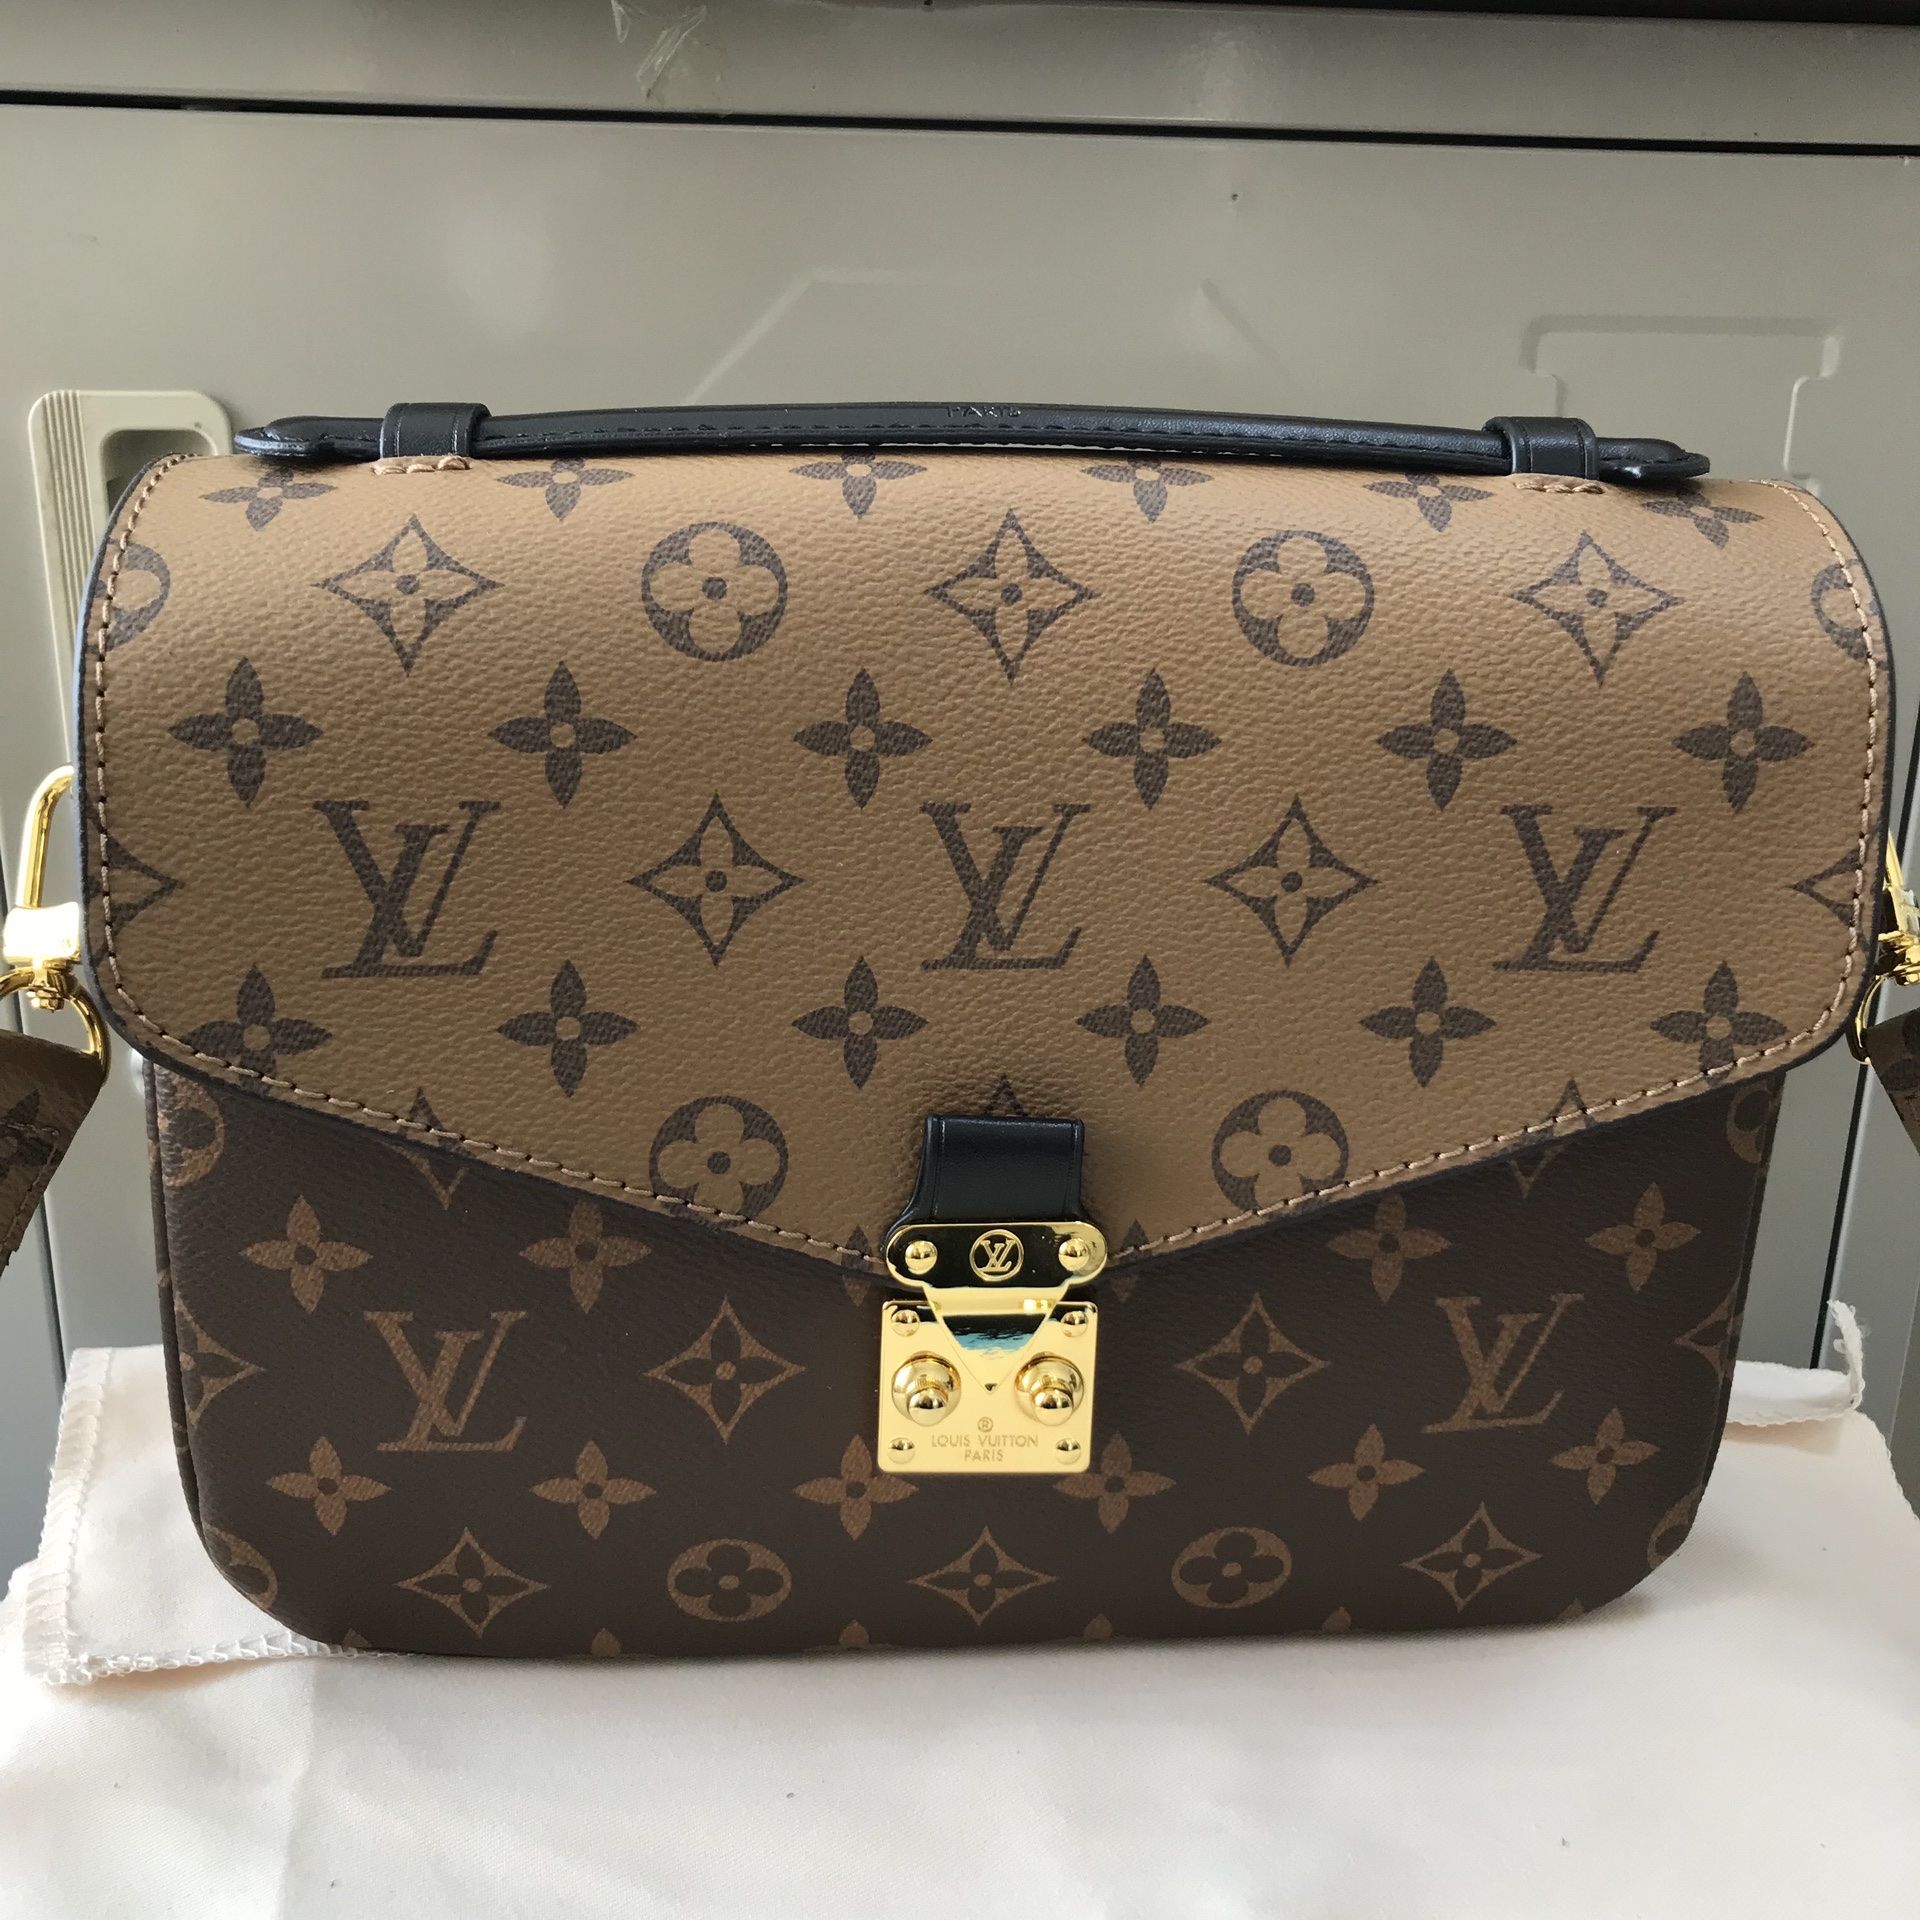 Louis Vuitton Outdoor Messenger for Sale in Horsham, PA - OfferUp